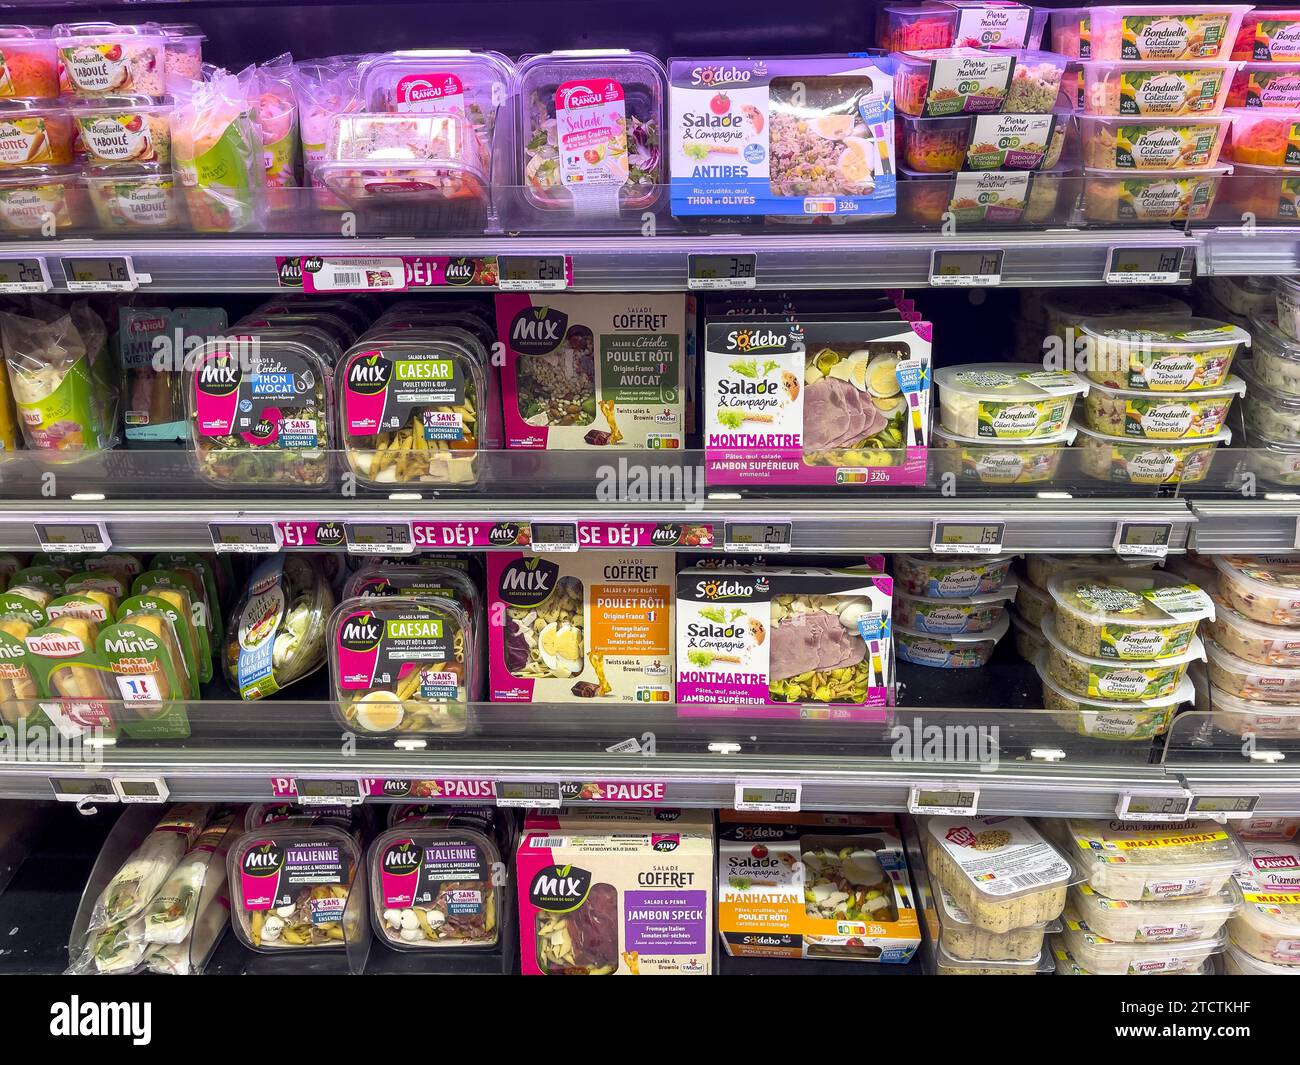 Ready-made dishes sold in plastic containers in a supermarket, Paris, France Stock Photo